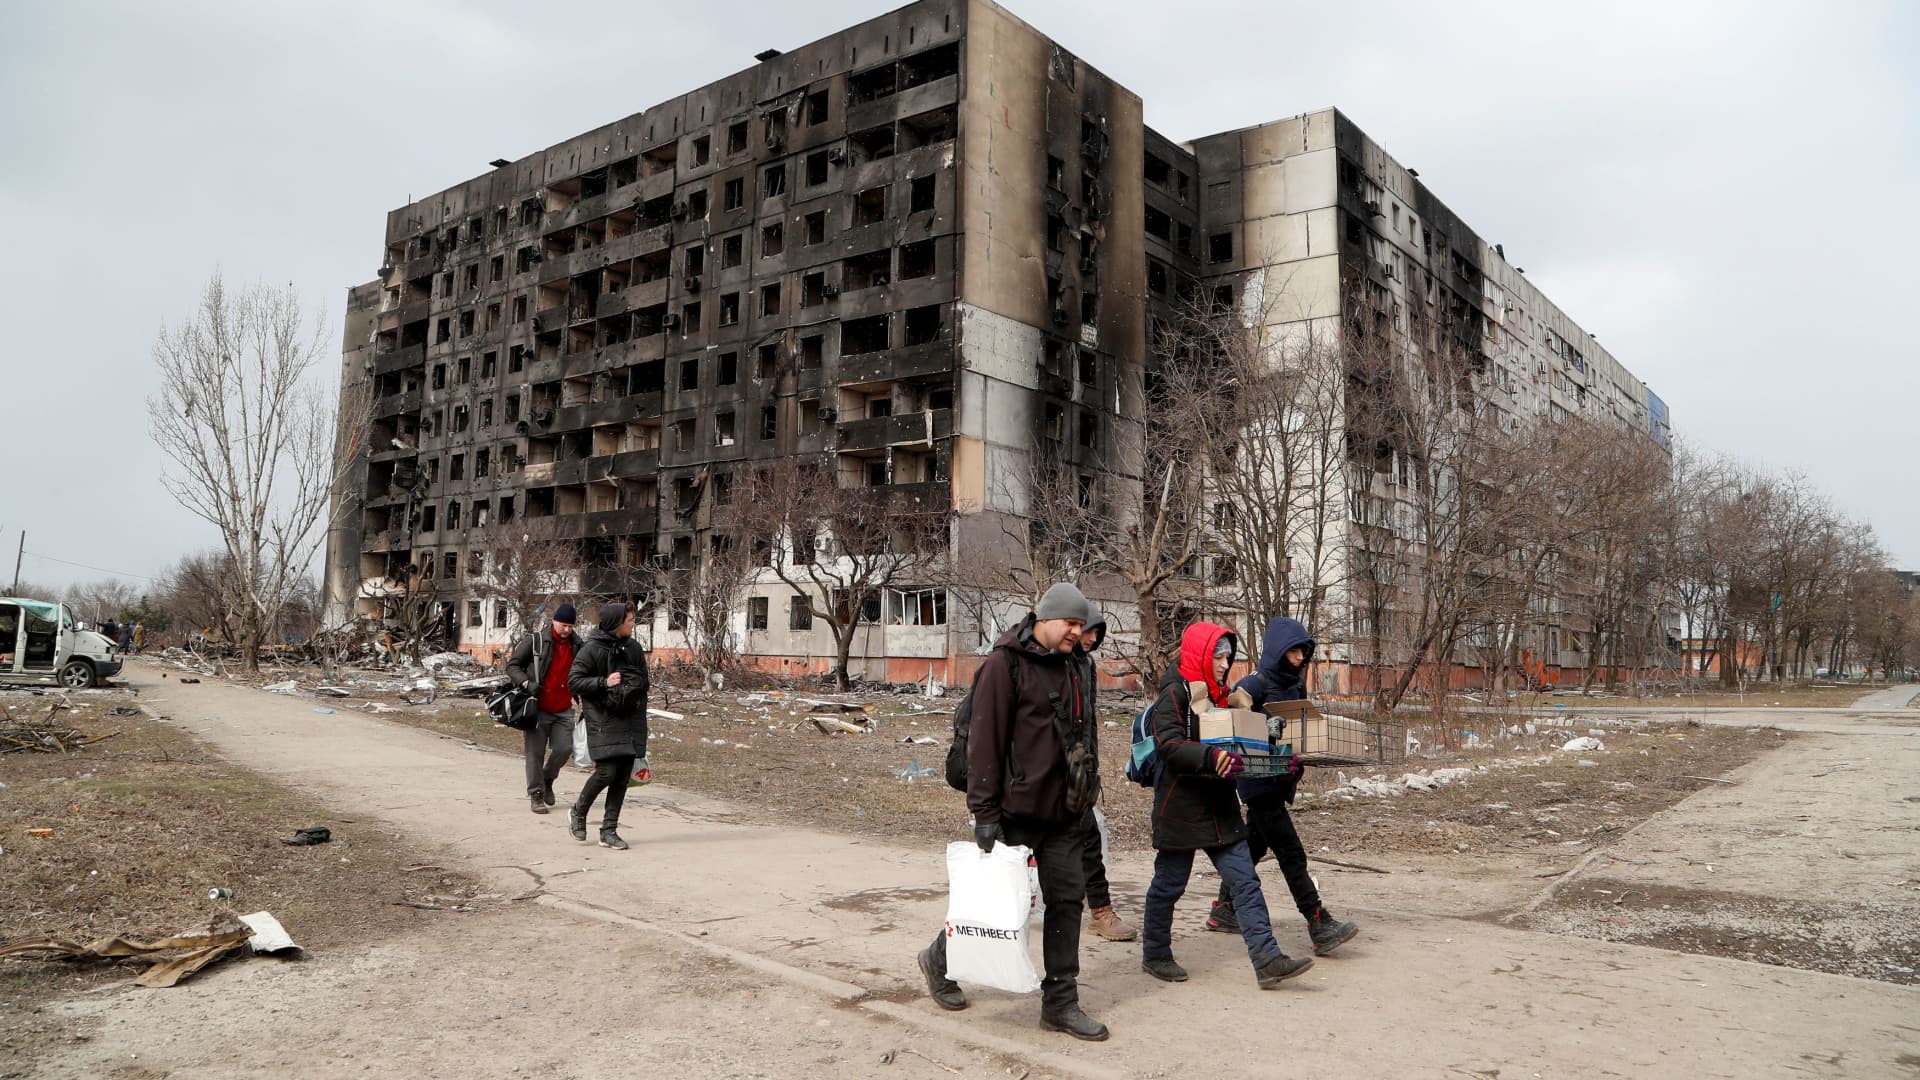 People walk along a street near a block of flats, which was destroyed during Ukraine-Russia conflict in the besieged port city of Mariupol, Ukraine March 17, 2022.